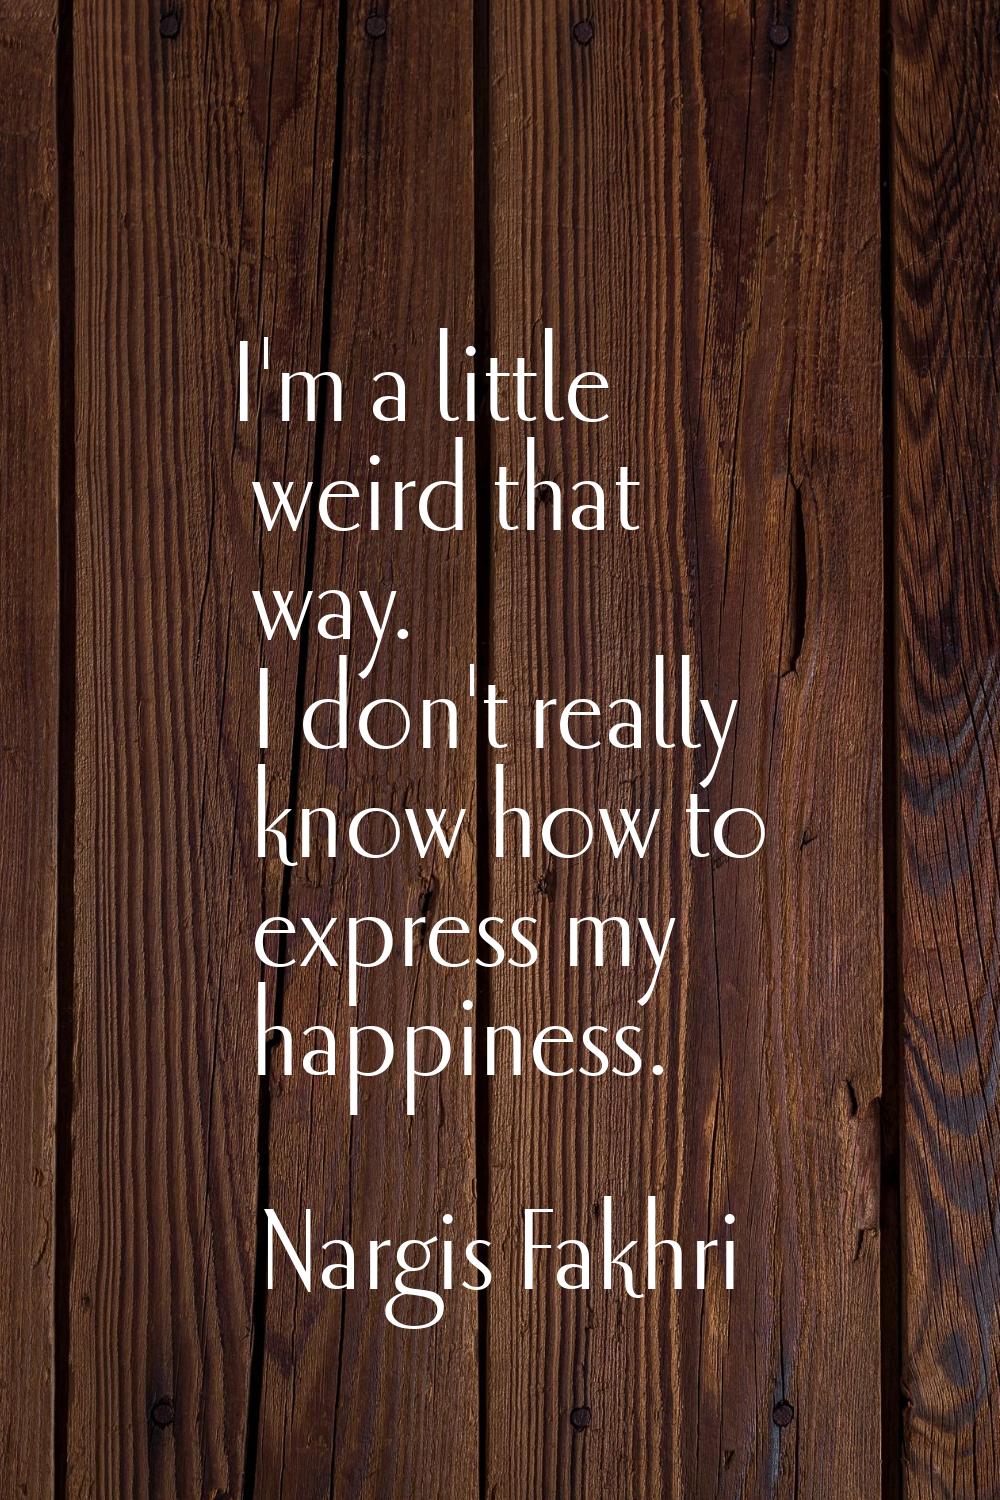 I'm a little weird that way. I don't really know how to express my happiness.